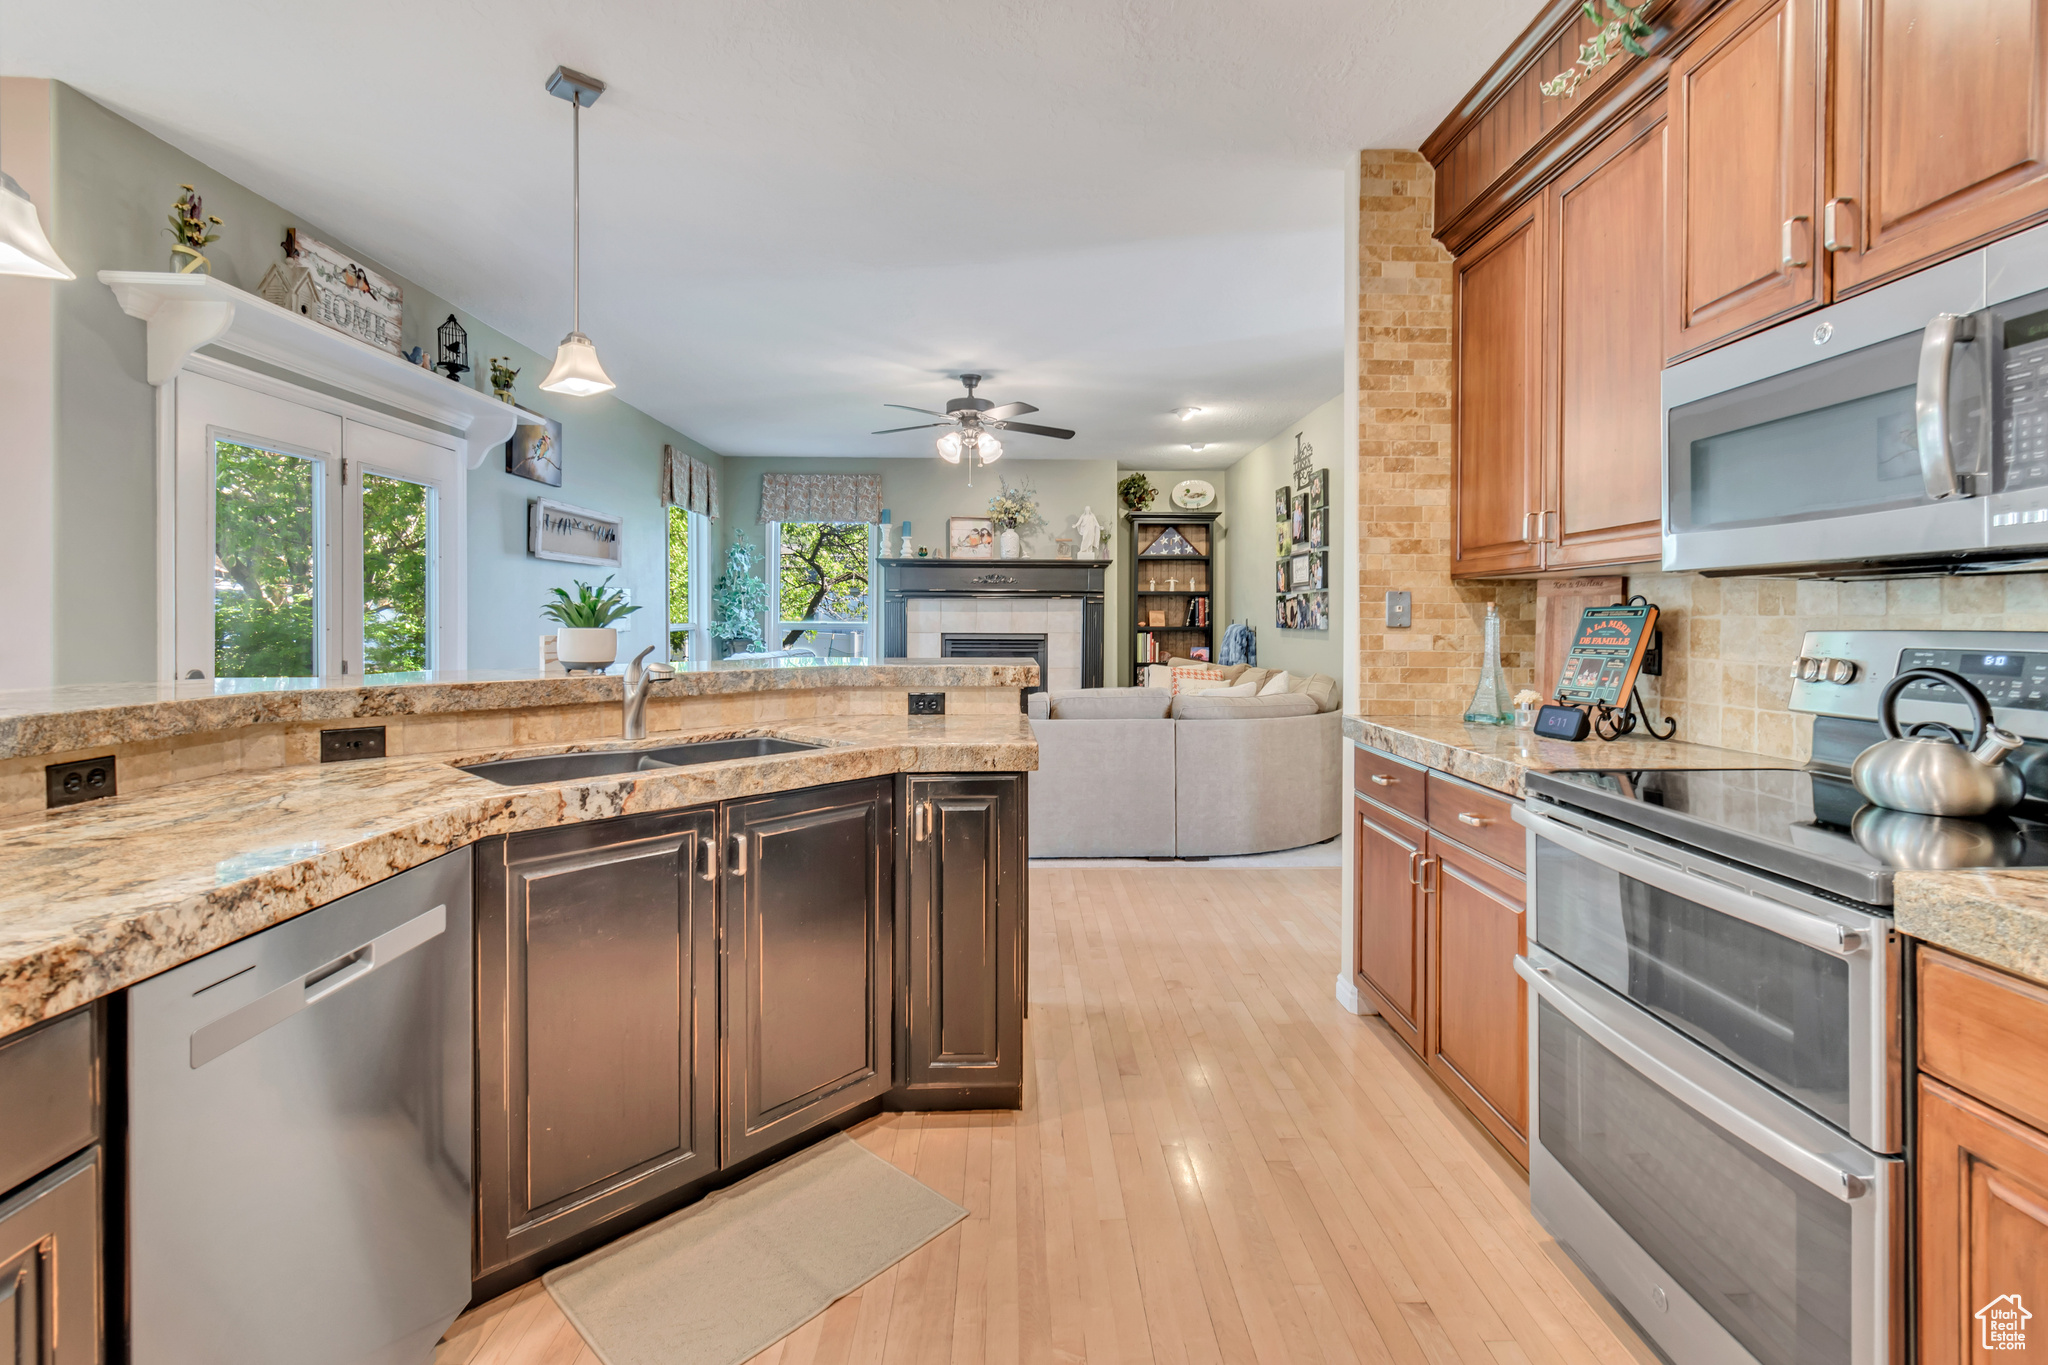 Kitchen with appliances with stainless steel finishes, ceiling fan, tasteful backsplash, light wood-type flooring, and decorative light fixtures